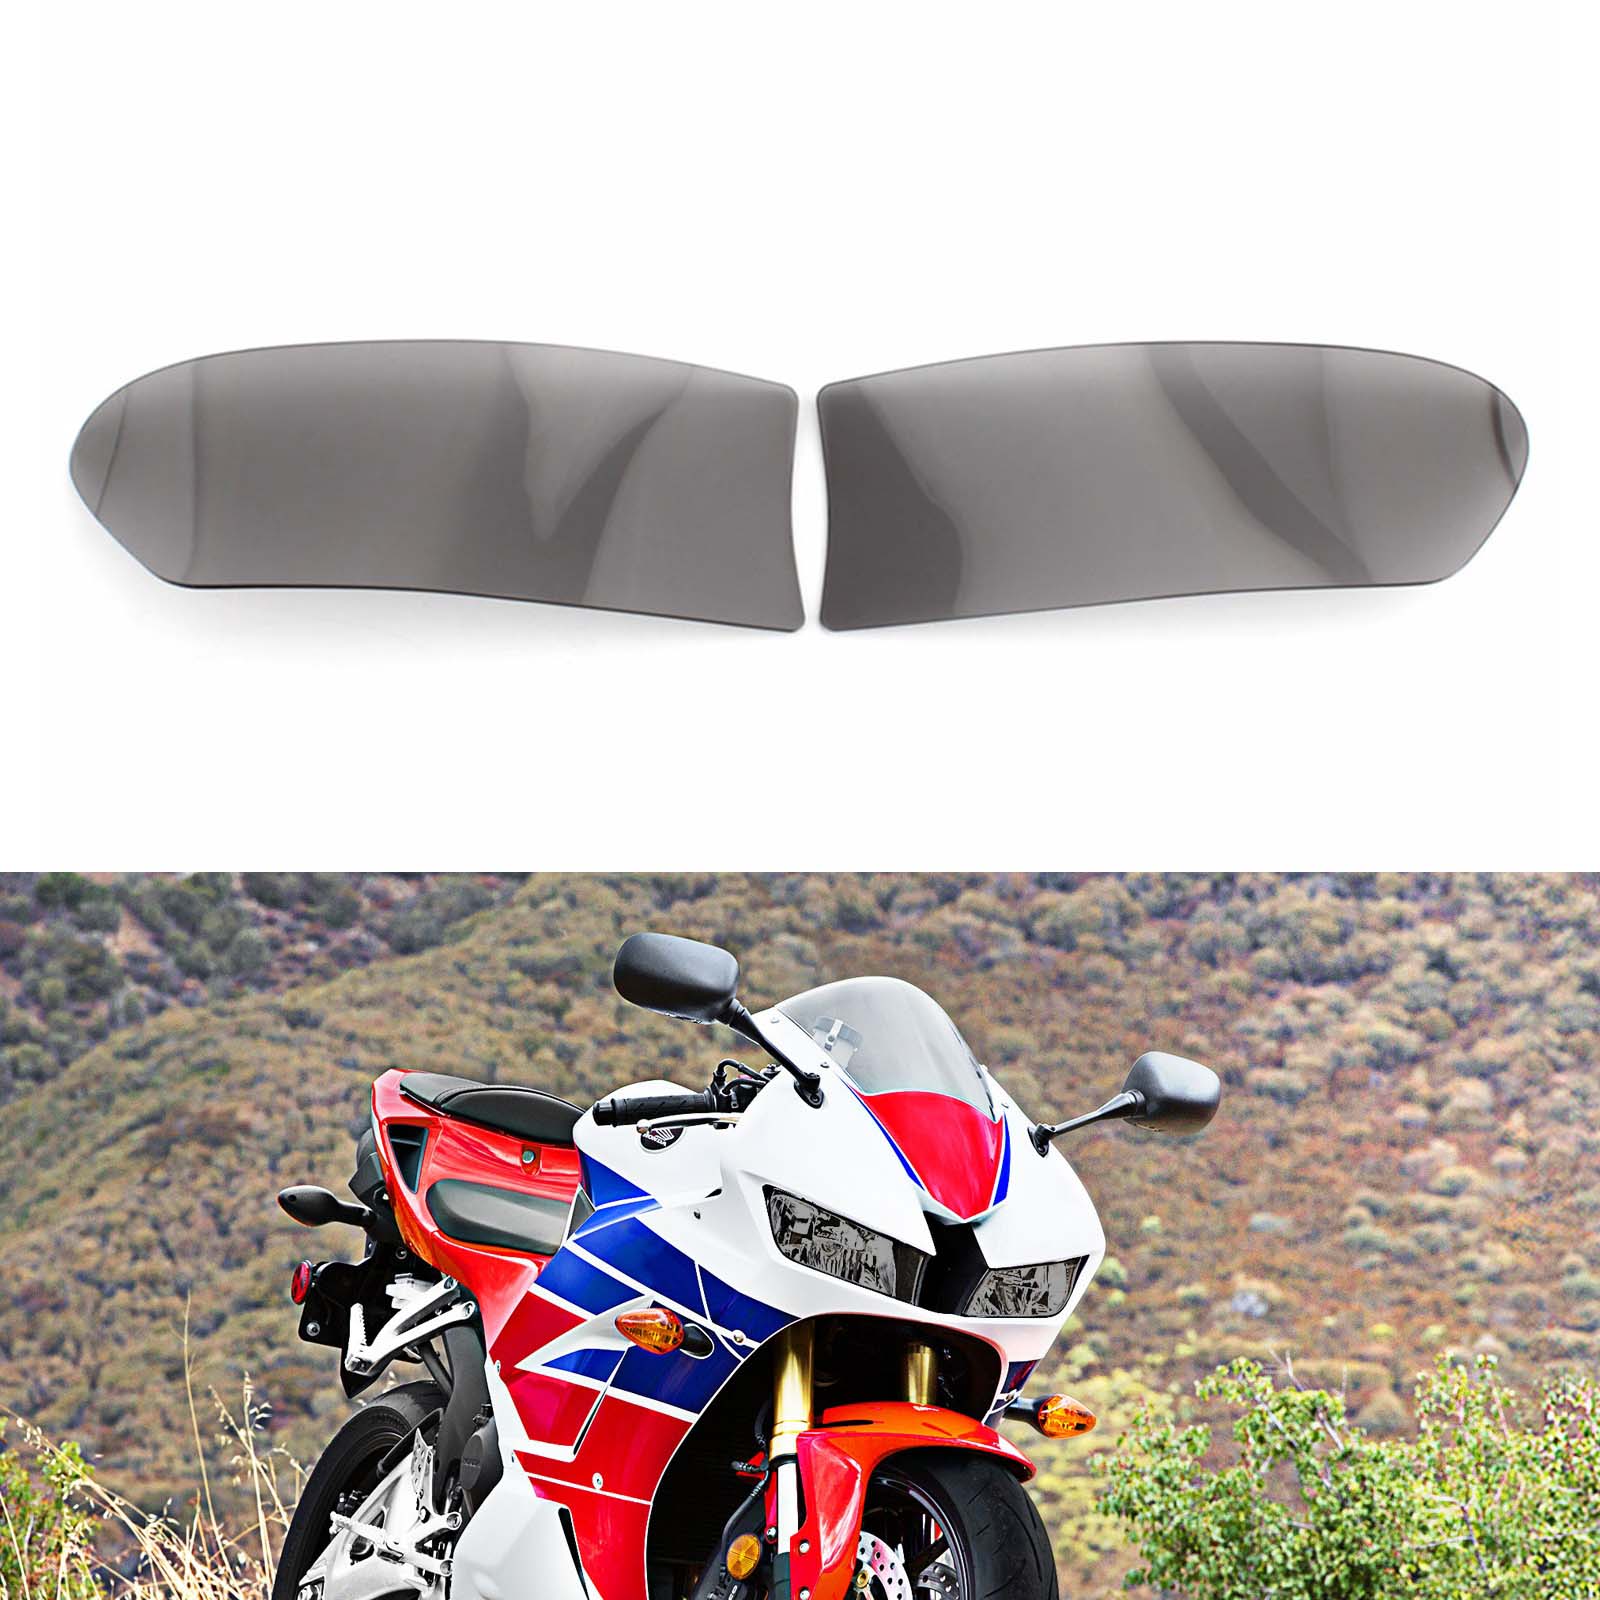 Front Headlight Lens Protection Cover Fit For Honda Cbr 600 Rr 2013-2018? Smoke Generic